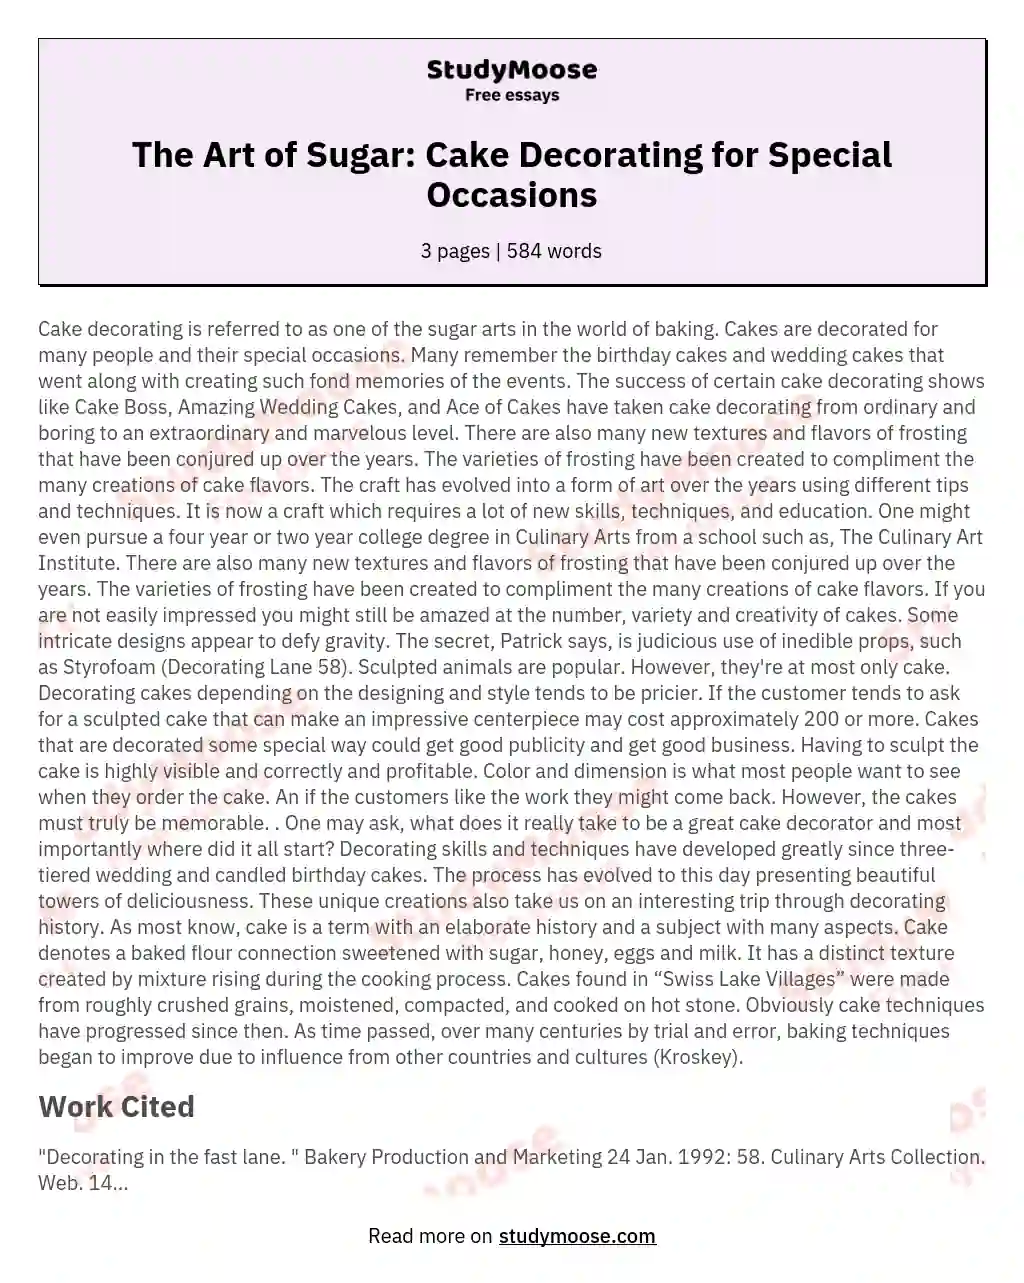 The Art of Sugar: Cake Decorating for Special Occasions essay